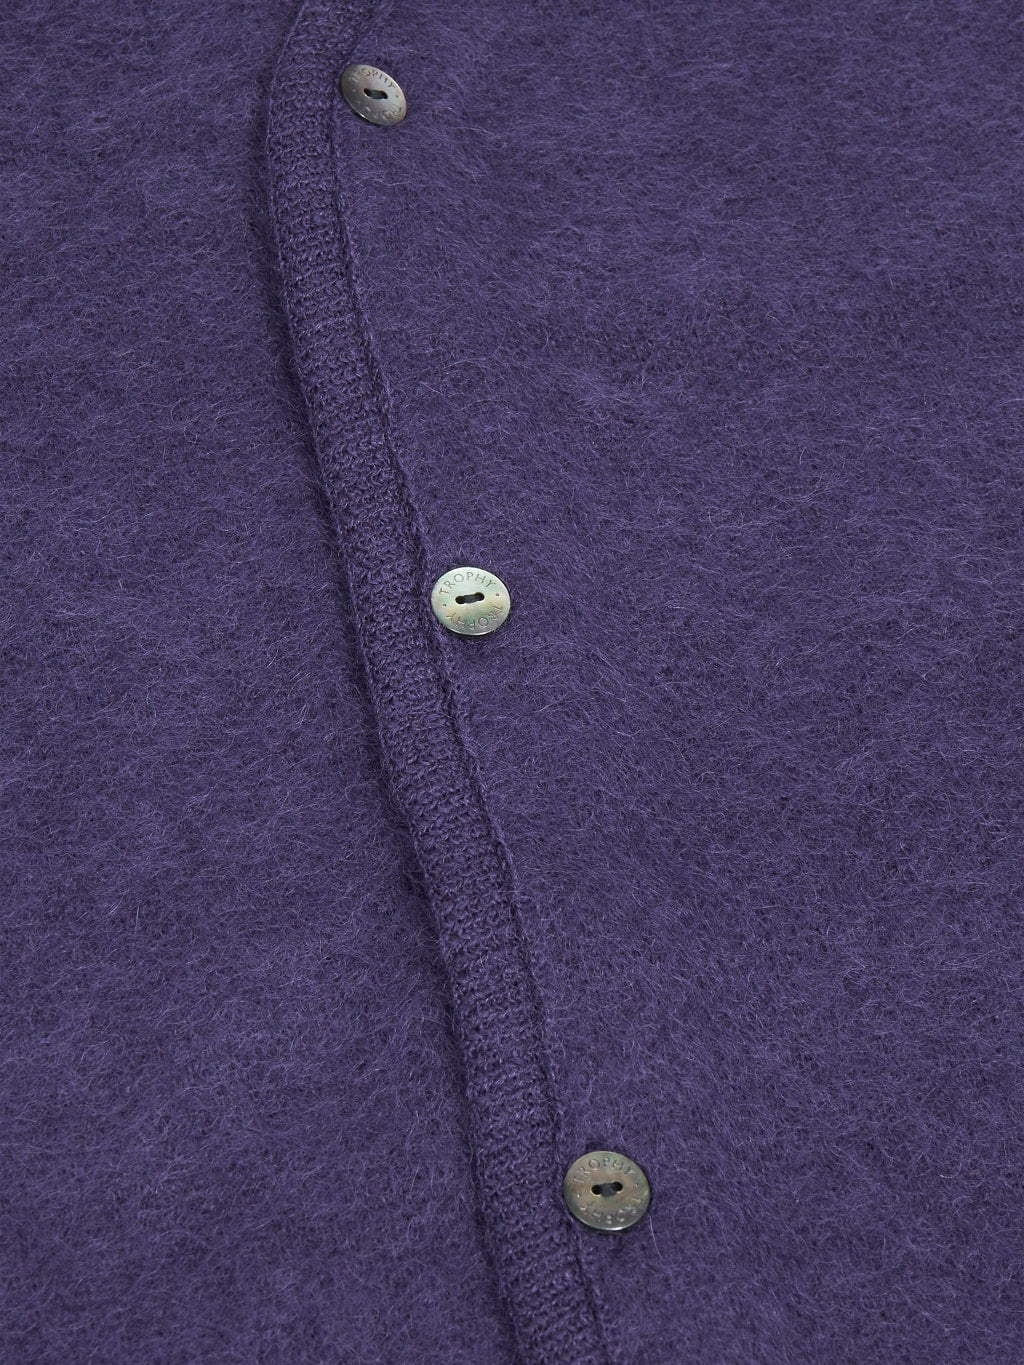 Trophy Clothing Mohair Knit Cardigan Dark Purple buttons